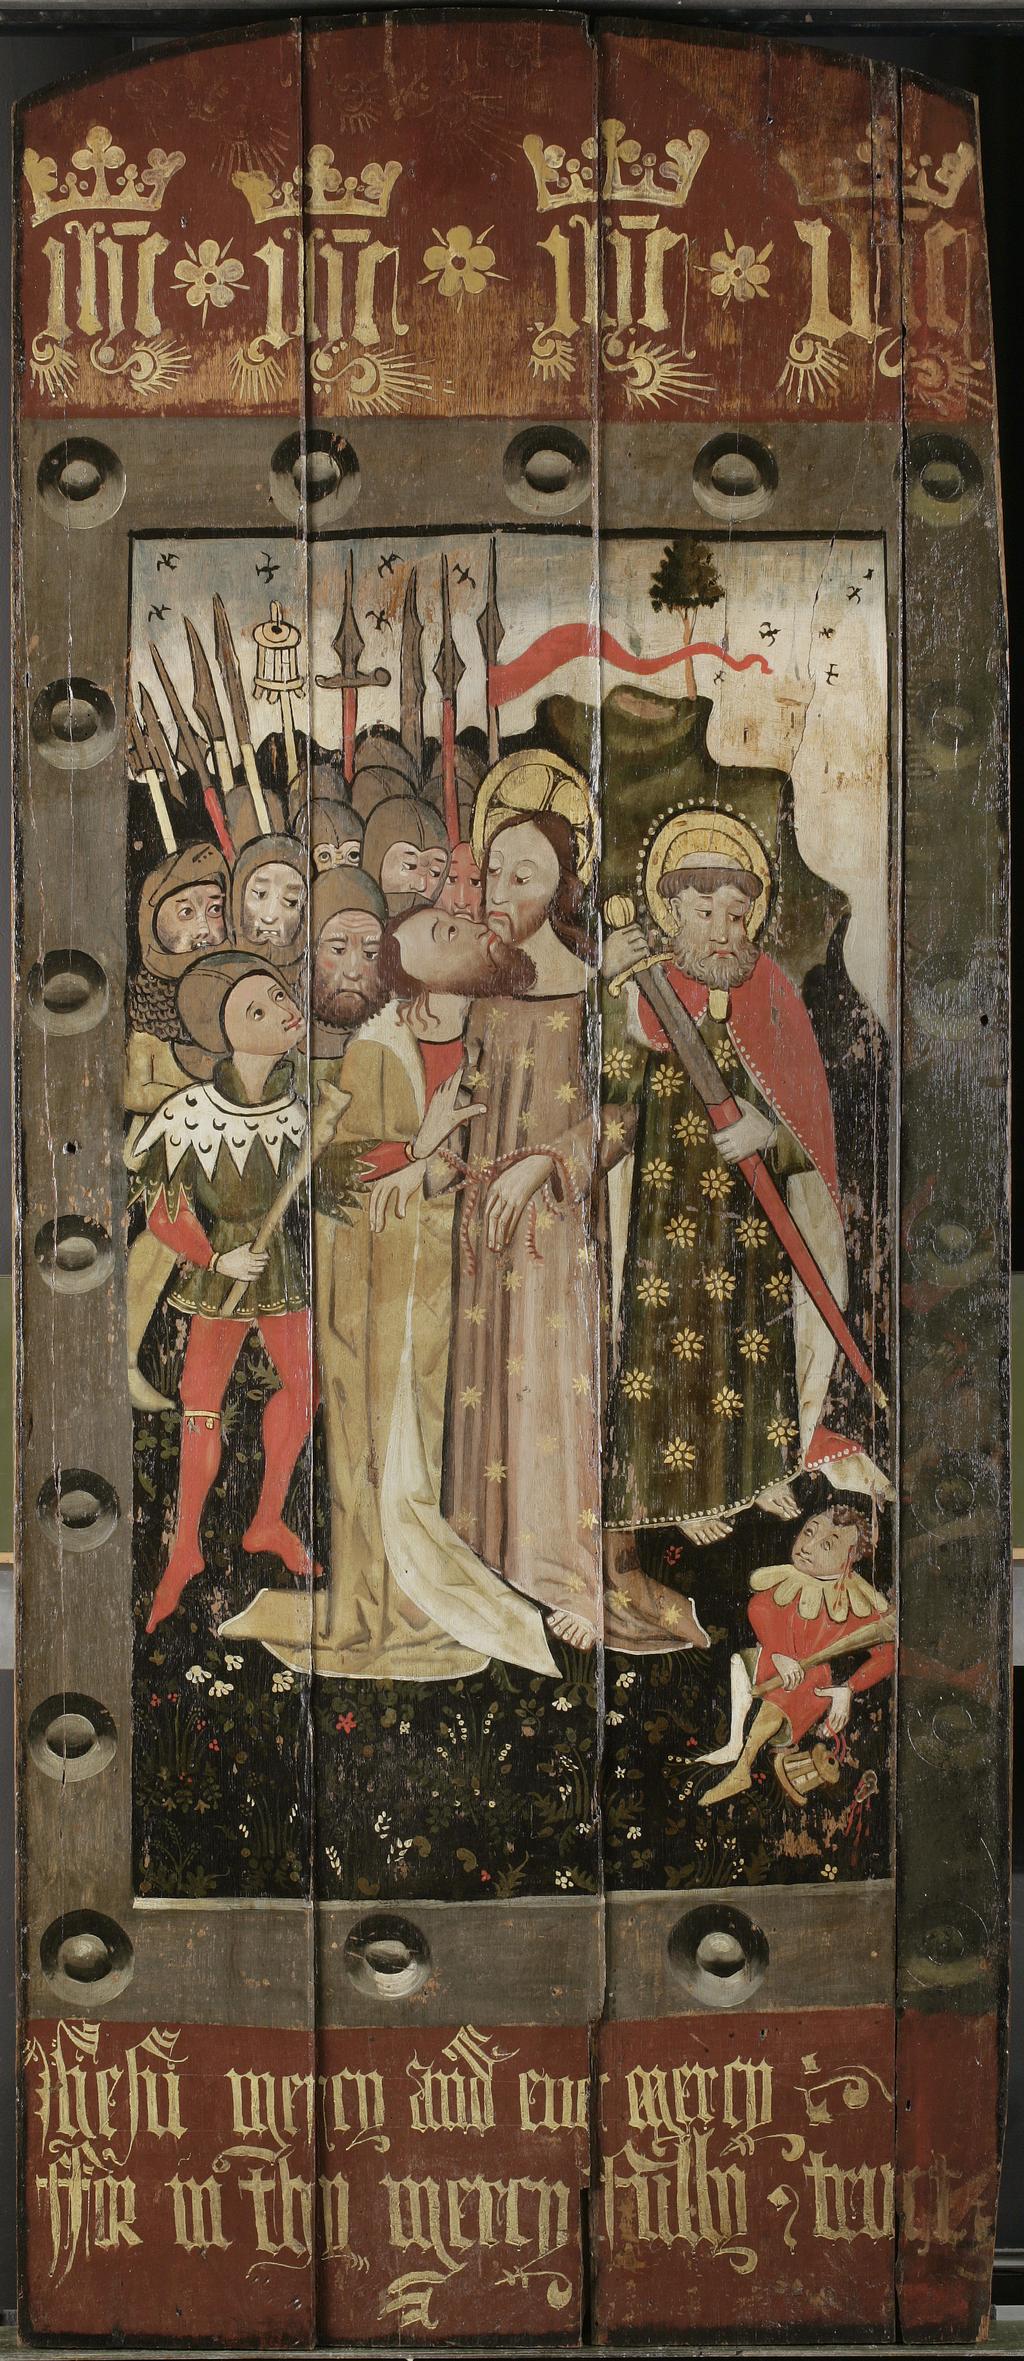 An image of The Kiss of Judas. British School, Coventry? Oil on oak boards, height 173 cm, width 74.3 cm, c 1470. Inscription; u.c.; painted; IHC; holy monogram, repeated four times. Inscription; l.c.; painted; Jhesu mercy and eue[r] mercy Ffor in thy mercy fully trust. Notes: HKI-2426.